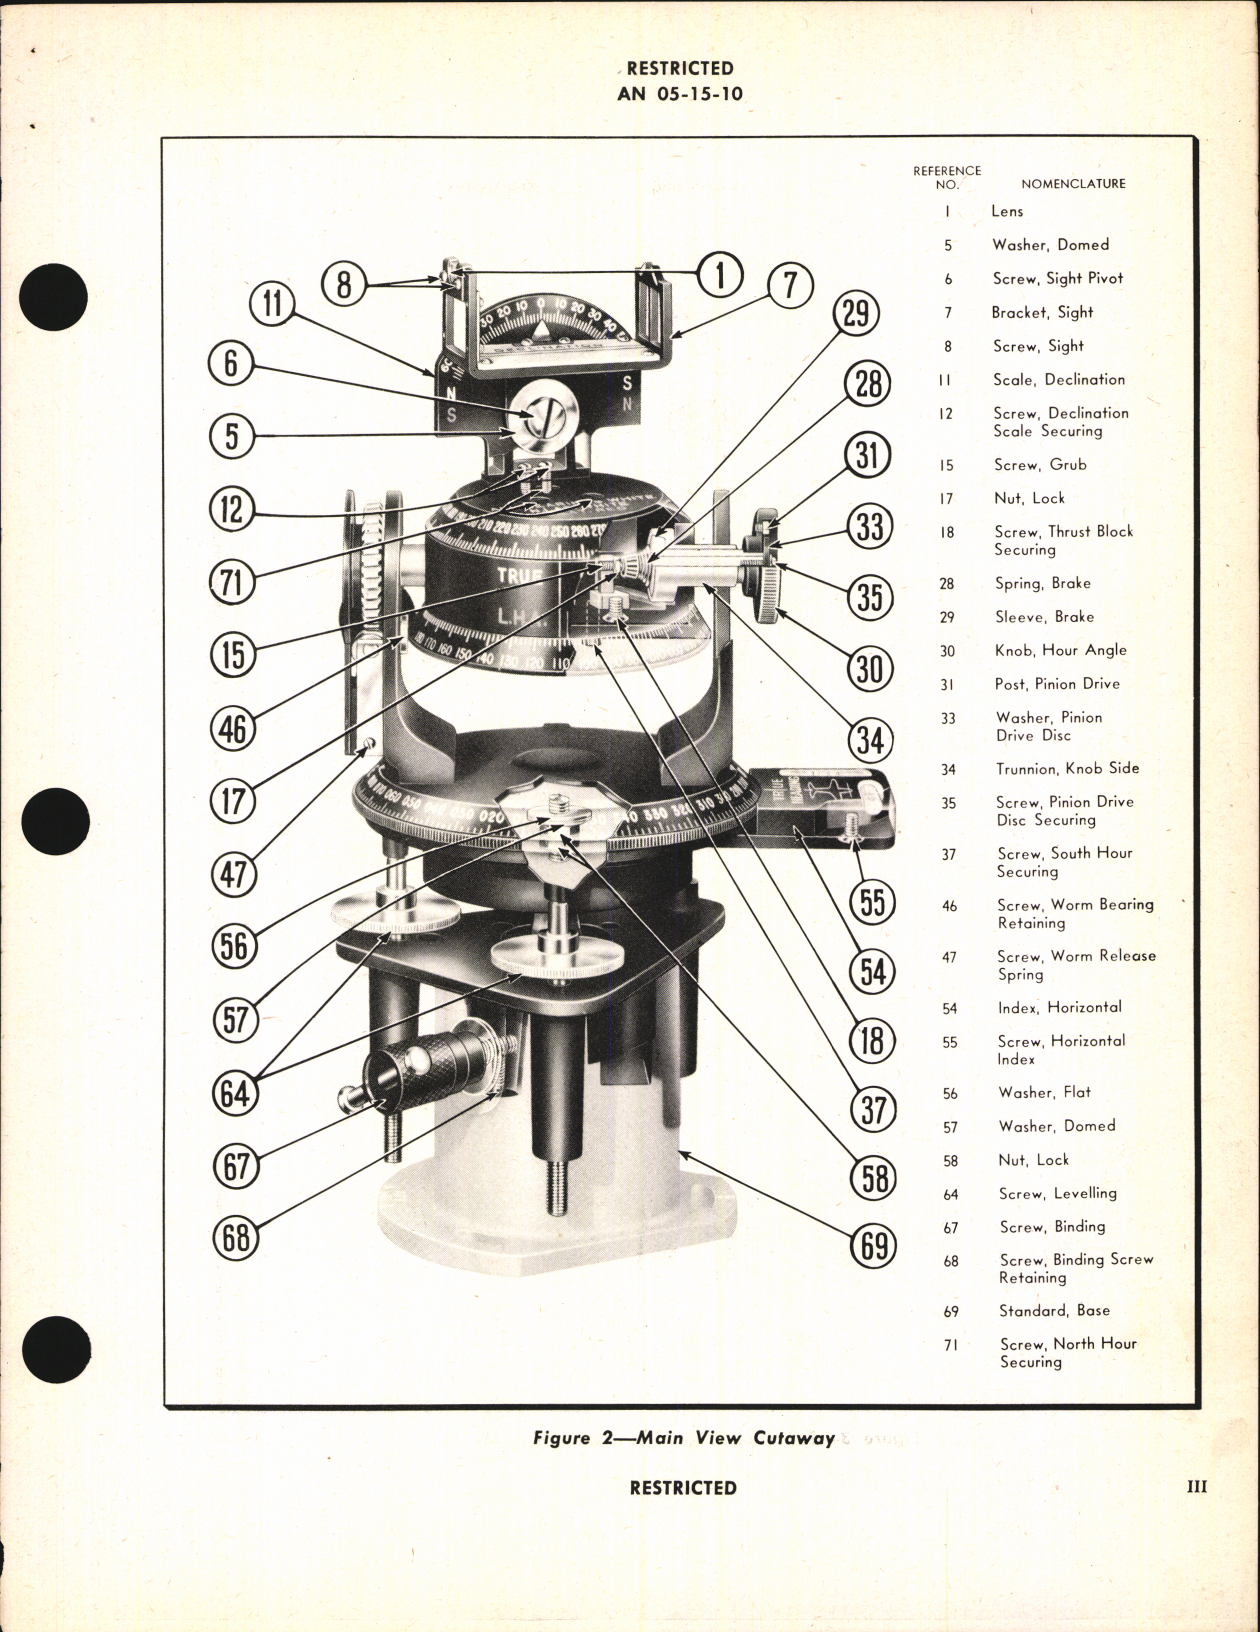 Sample page 7 from AirCorps Library document: Handbook of Instructions with Parts Catalog for Mark II Astro Compass